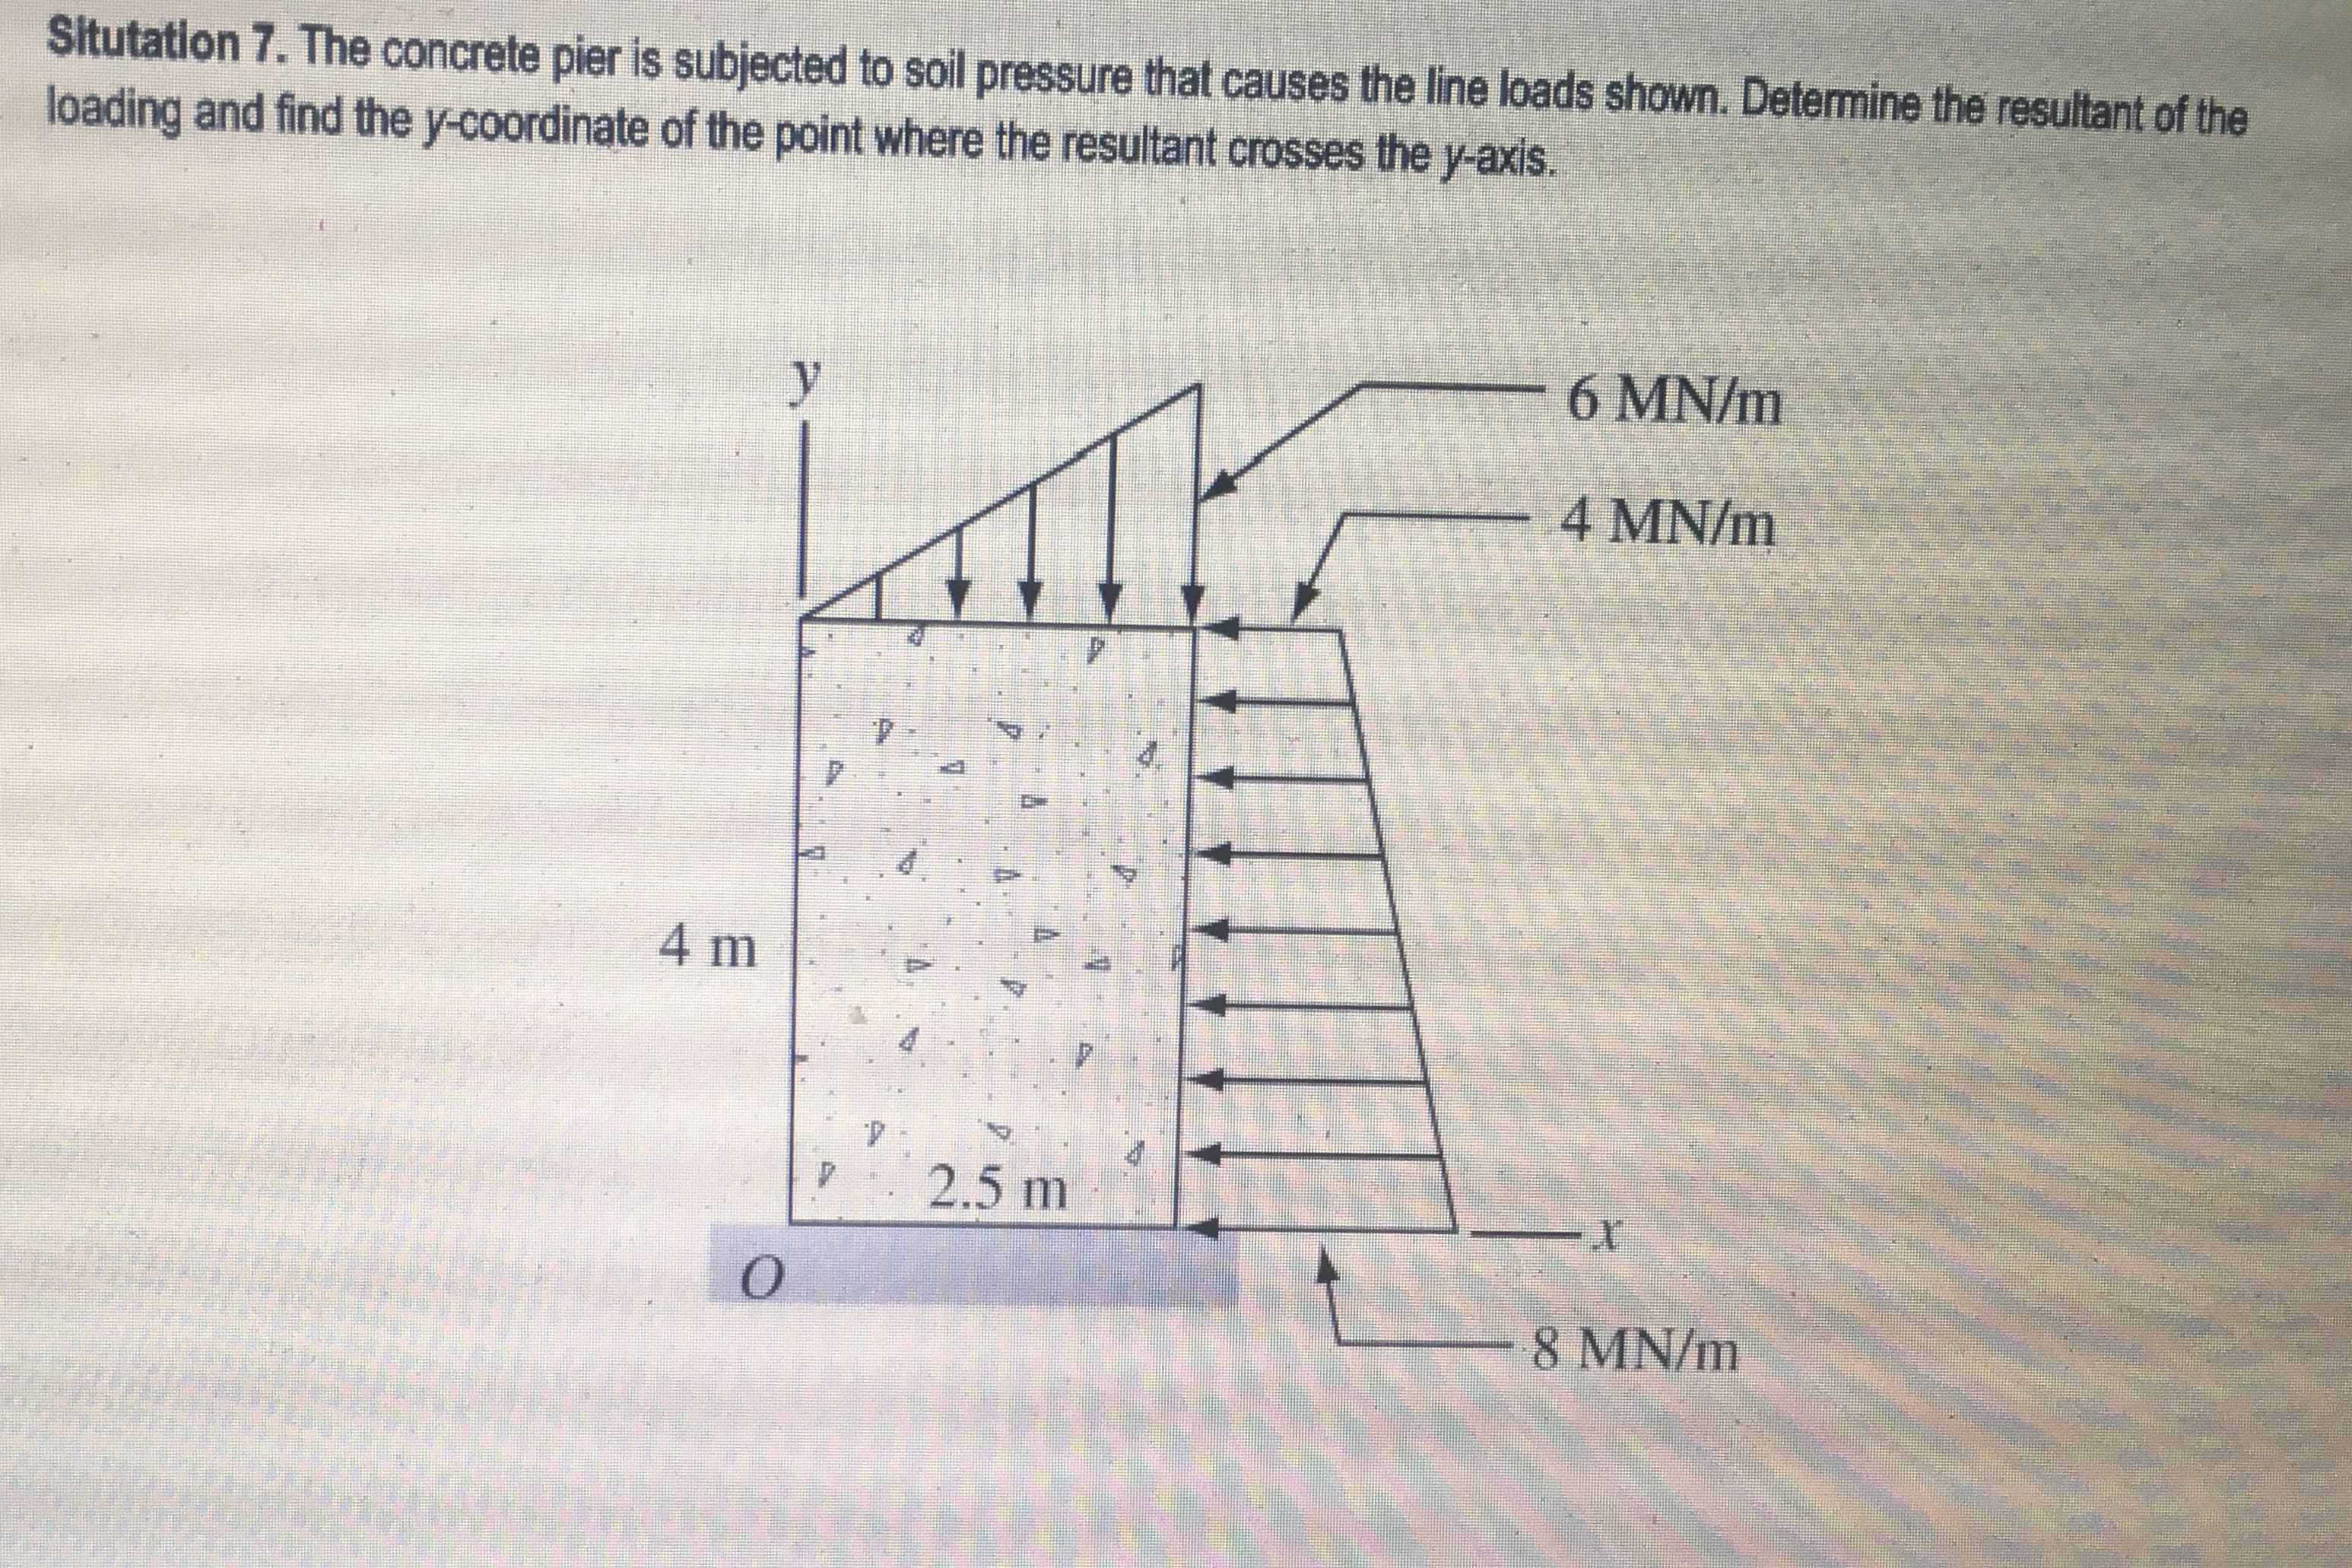 on 7. The concrete pier is subjected to soil pressure that causes the line loads shown. Determine the resultant of the
loading and find the y-coordinate of the point where the resultant crosses the y-axis.
